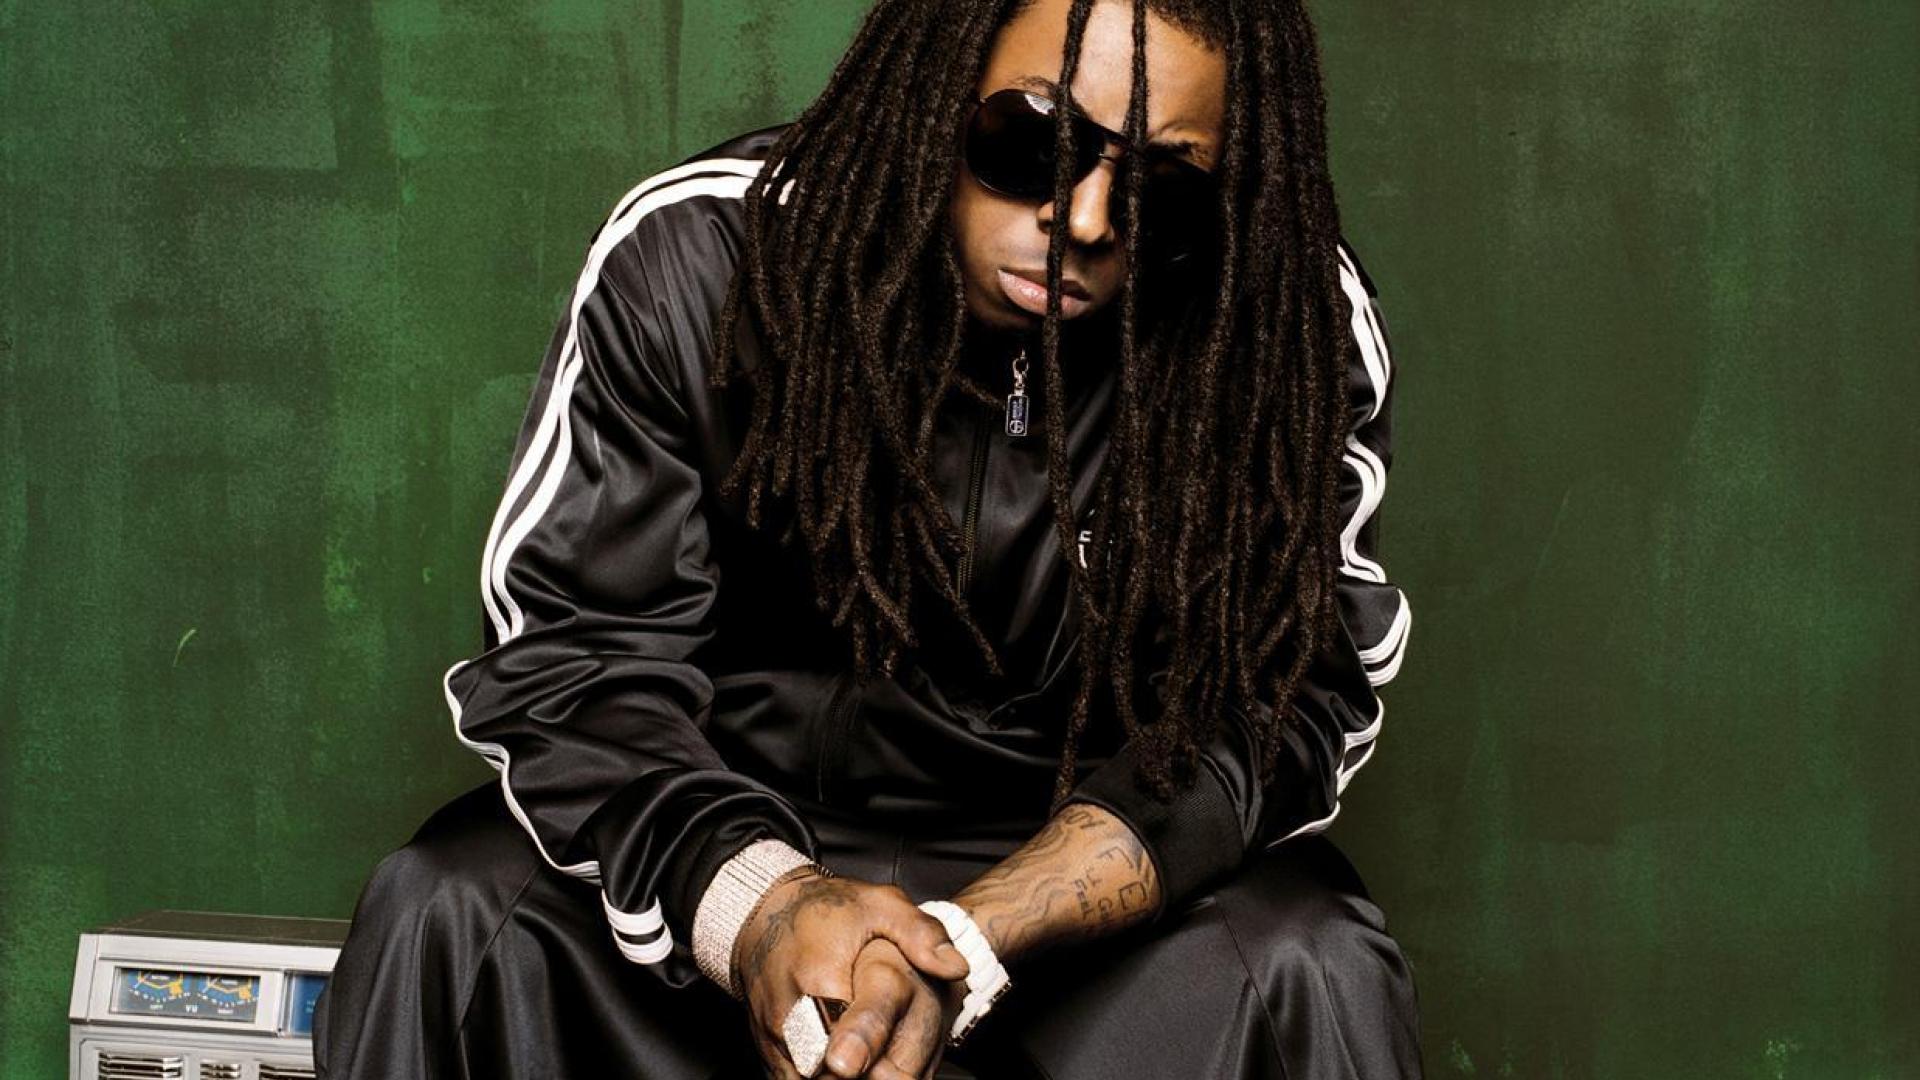 Lil wayne - (#53468) - High Quality and Resolution Wallpapers on ...